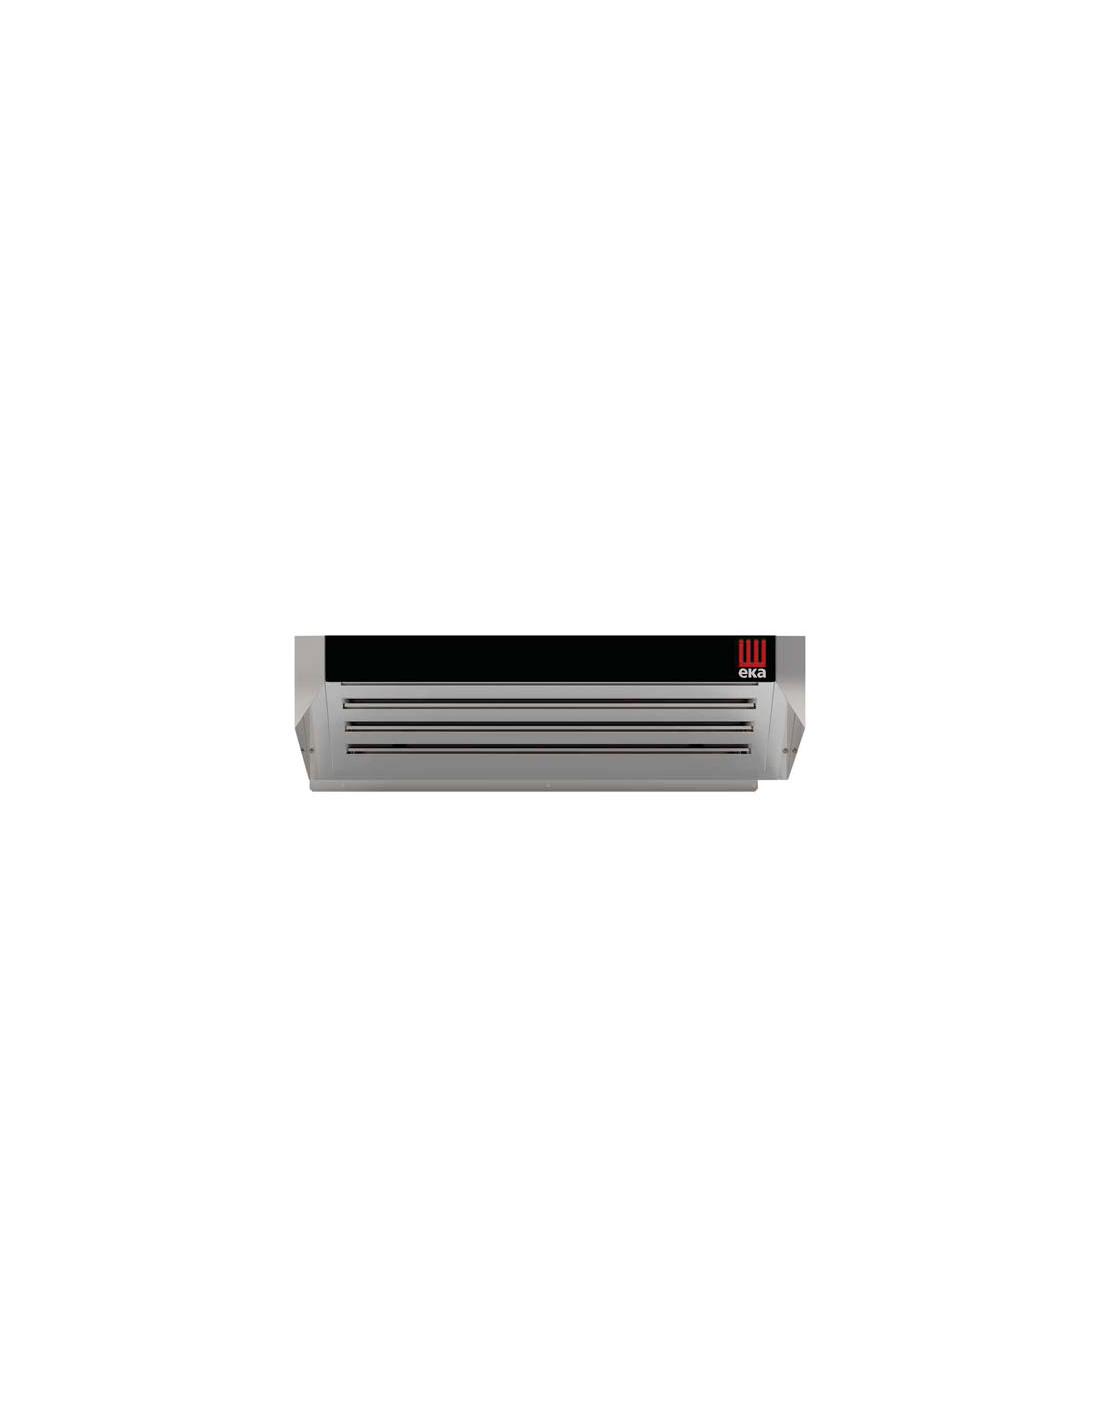 Condensing hood - For ovens 4 trays with steam - Single-phase power 230V - cm 78.4 x 90.7 x 25.5 h